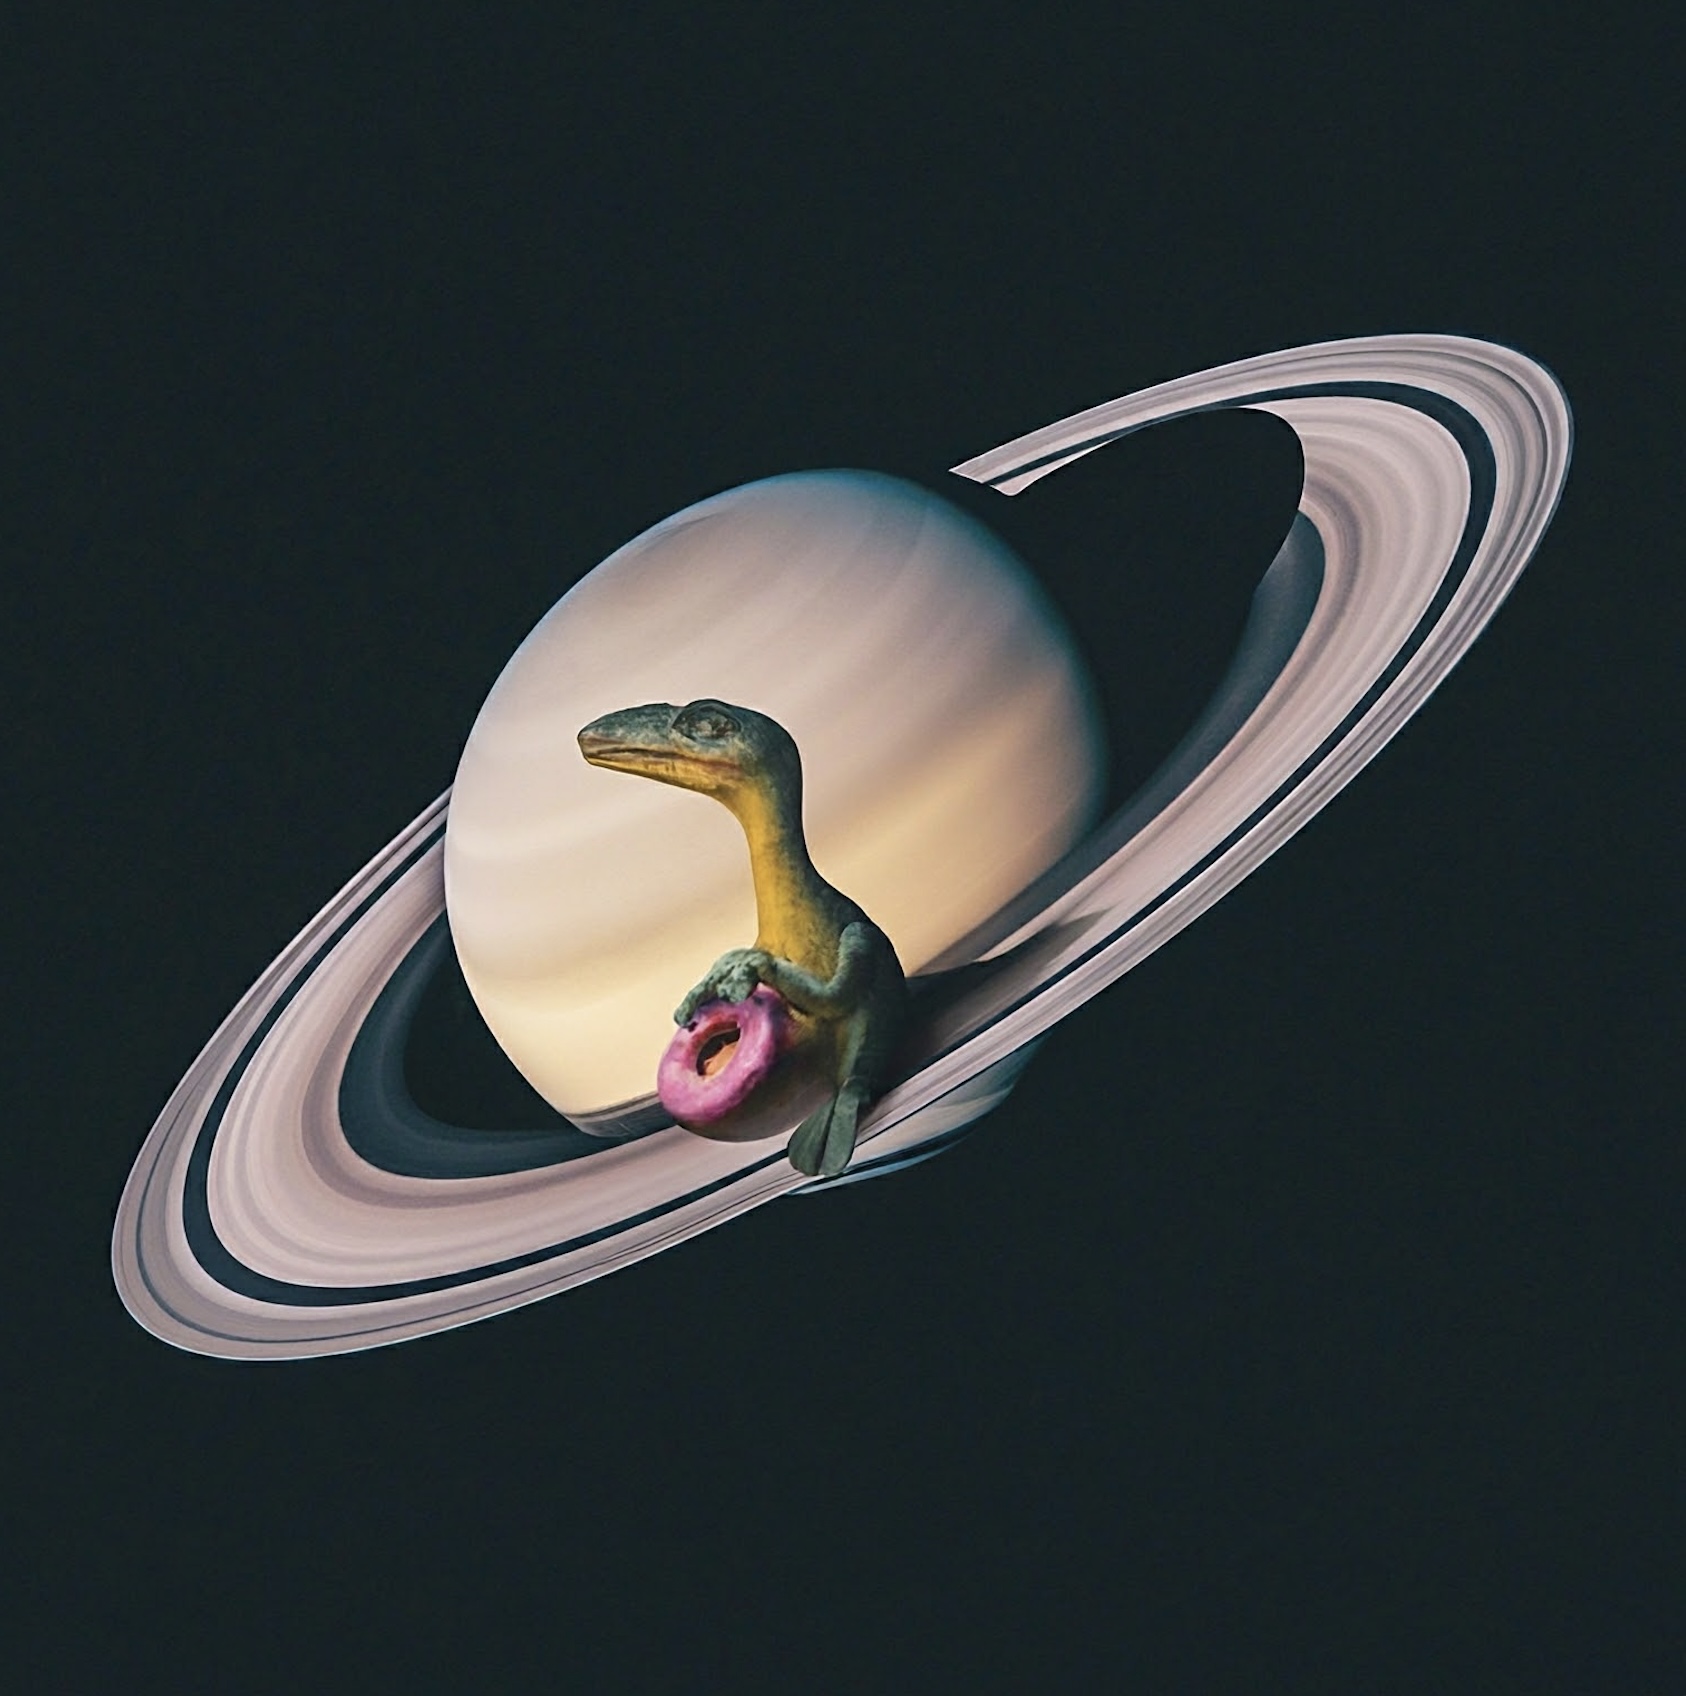 Dinosaur eating a donut, sitting on one of Saturn's rings